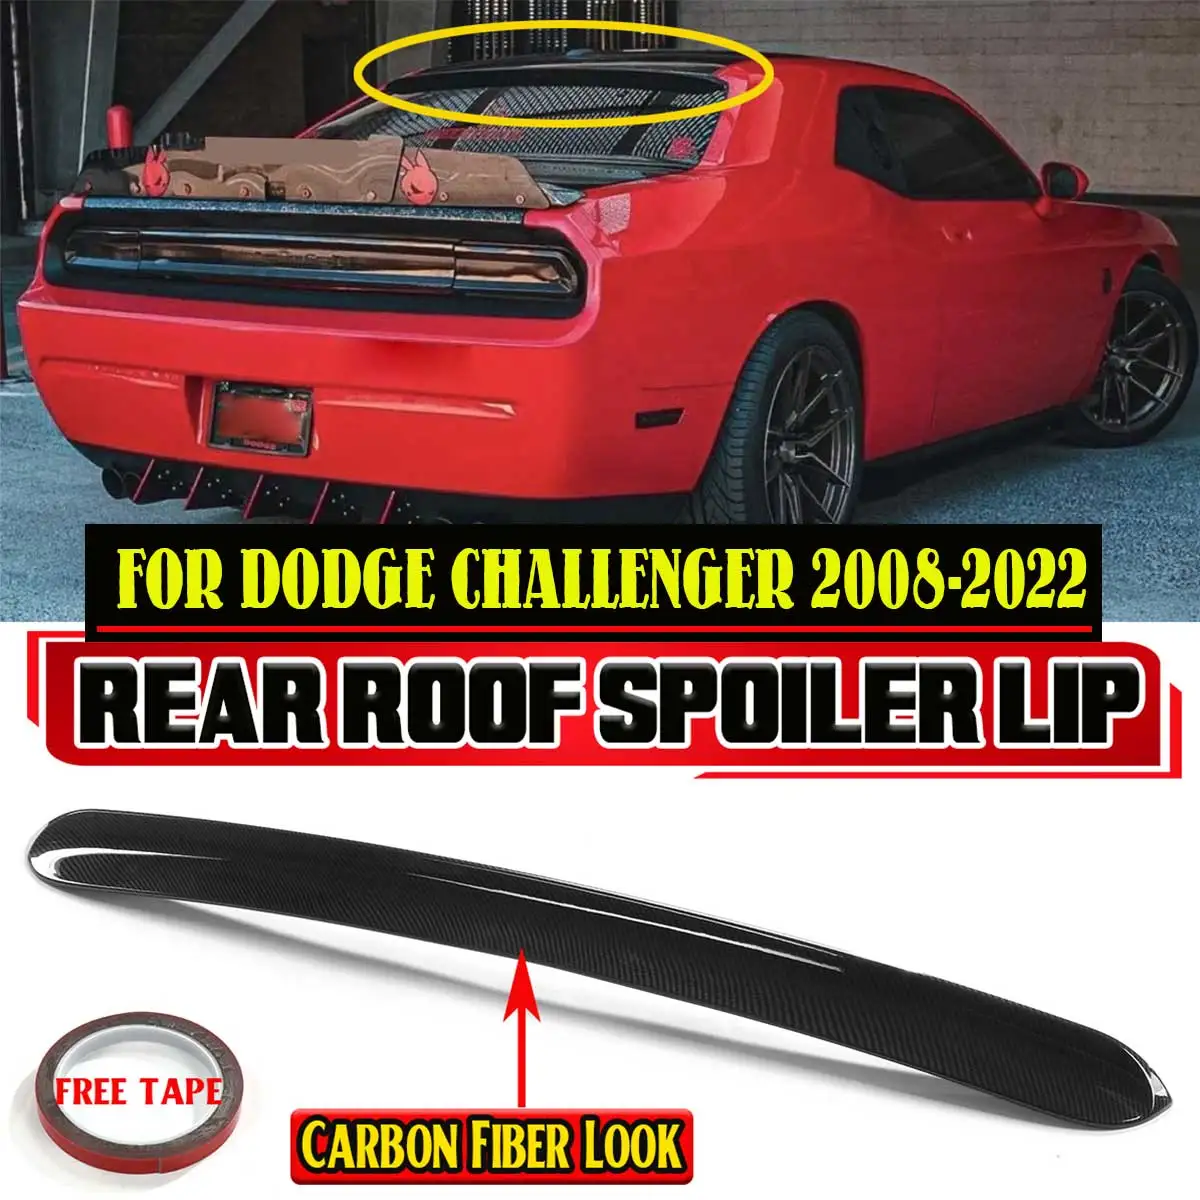 New Car Rear Roof Spoiler Lip Wing For DODGE Challenger 2008-2022 Rear Trunk Wing Roof Lip Spoiler Tail Wing Decoration